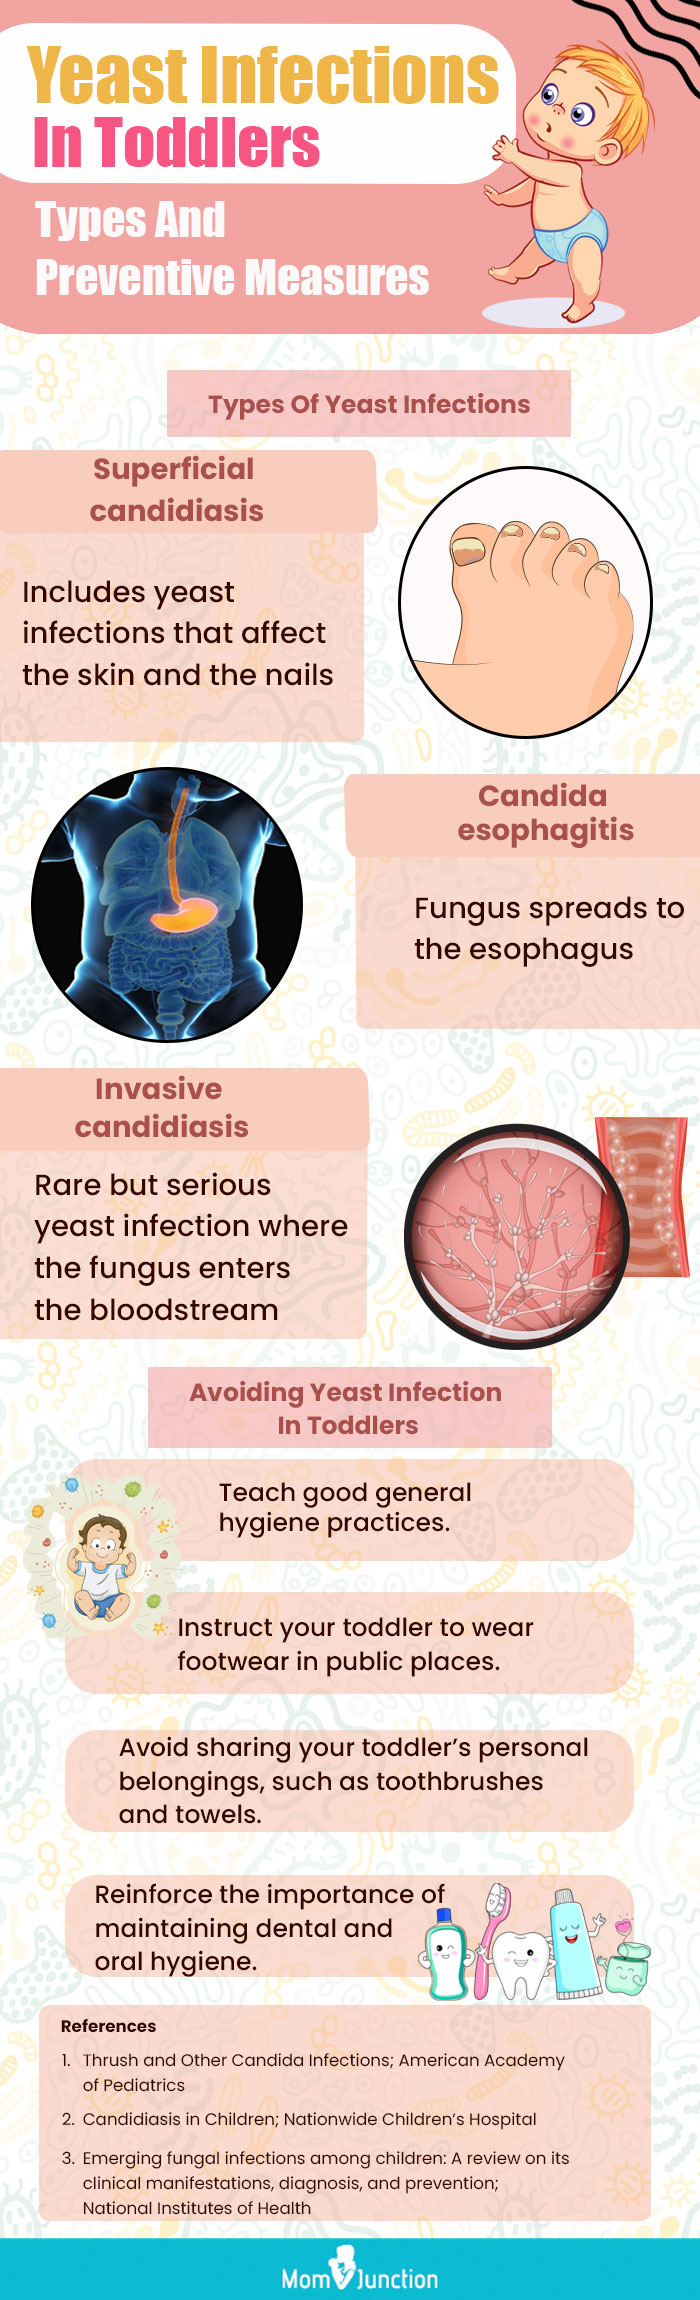 preventive measures for yeast infections in toddlers (infographic)